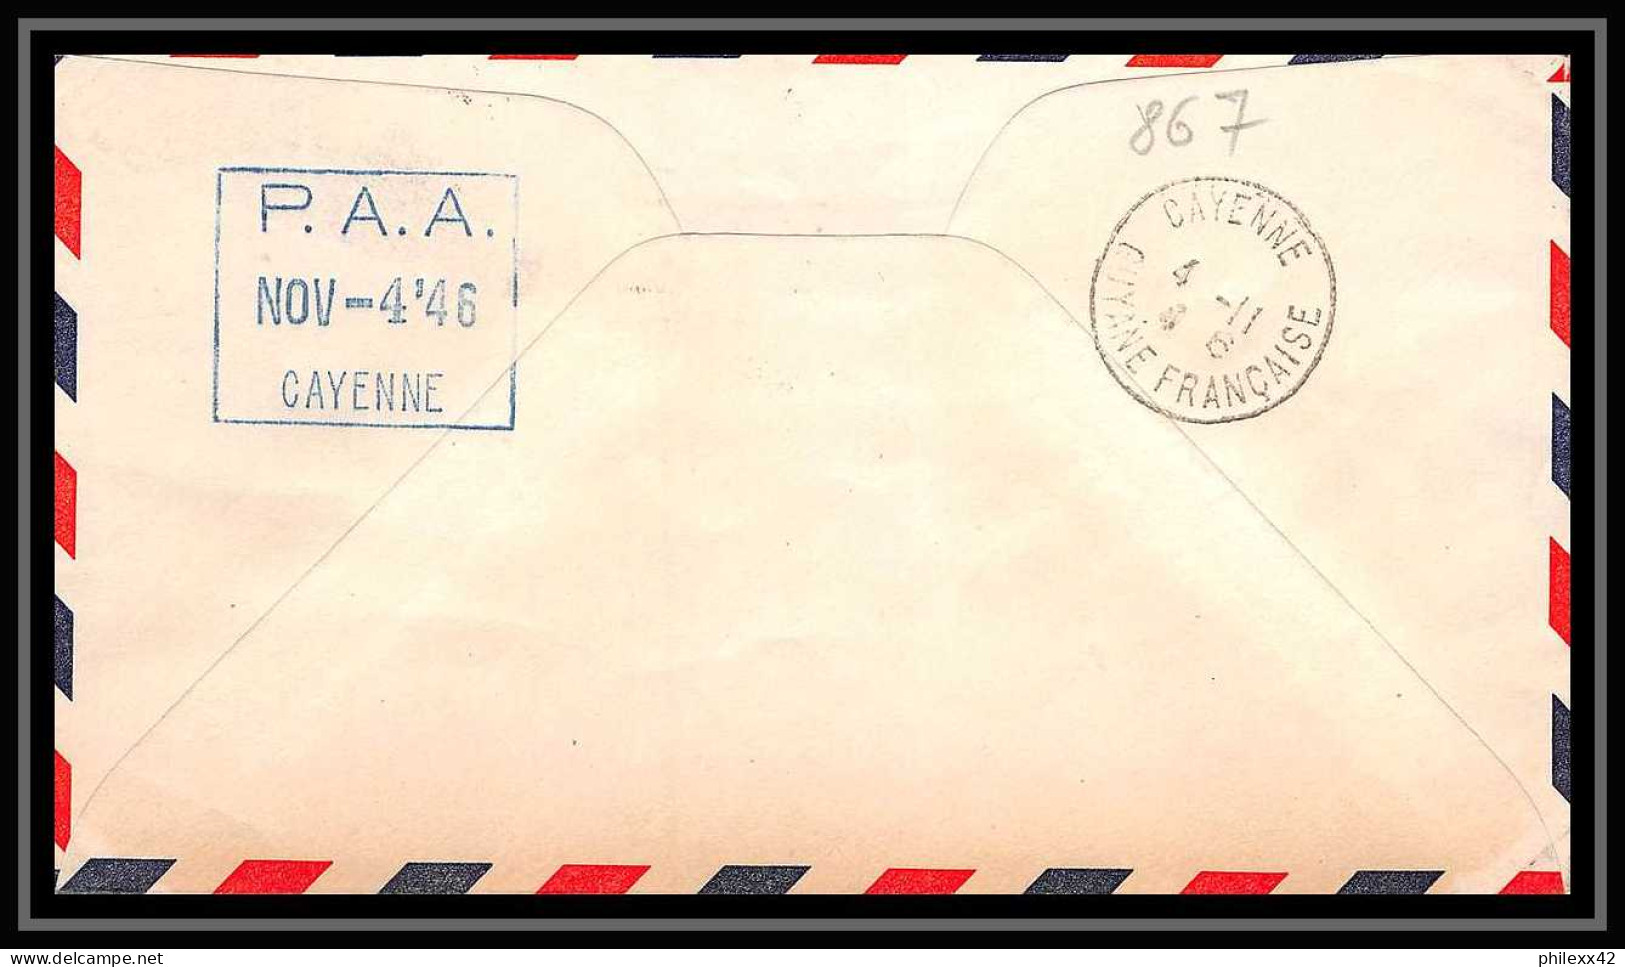 0867 Lettre Aviation (Airmail Cover Luftpost) USA Premier Vol (first Flight) 1946 Cicero Illinois Cayenne Guyane - Covers & Documents